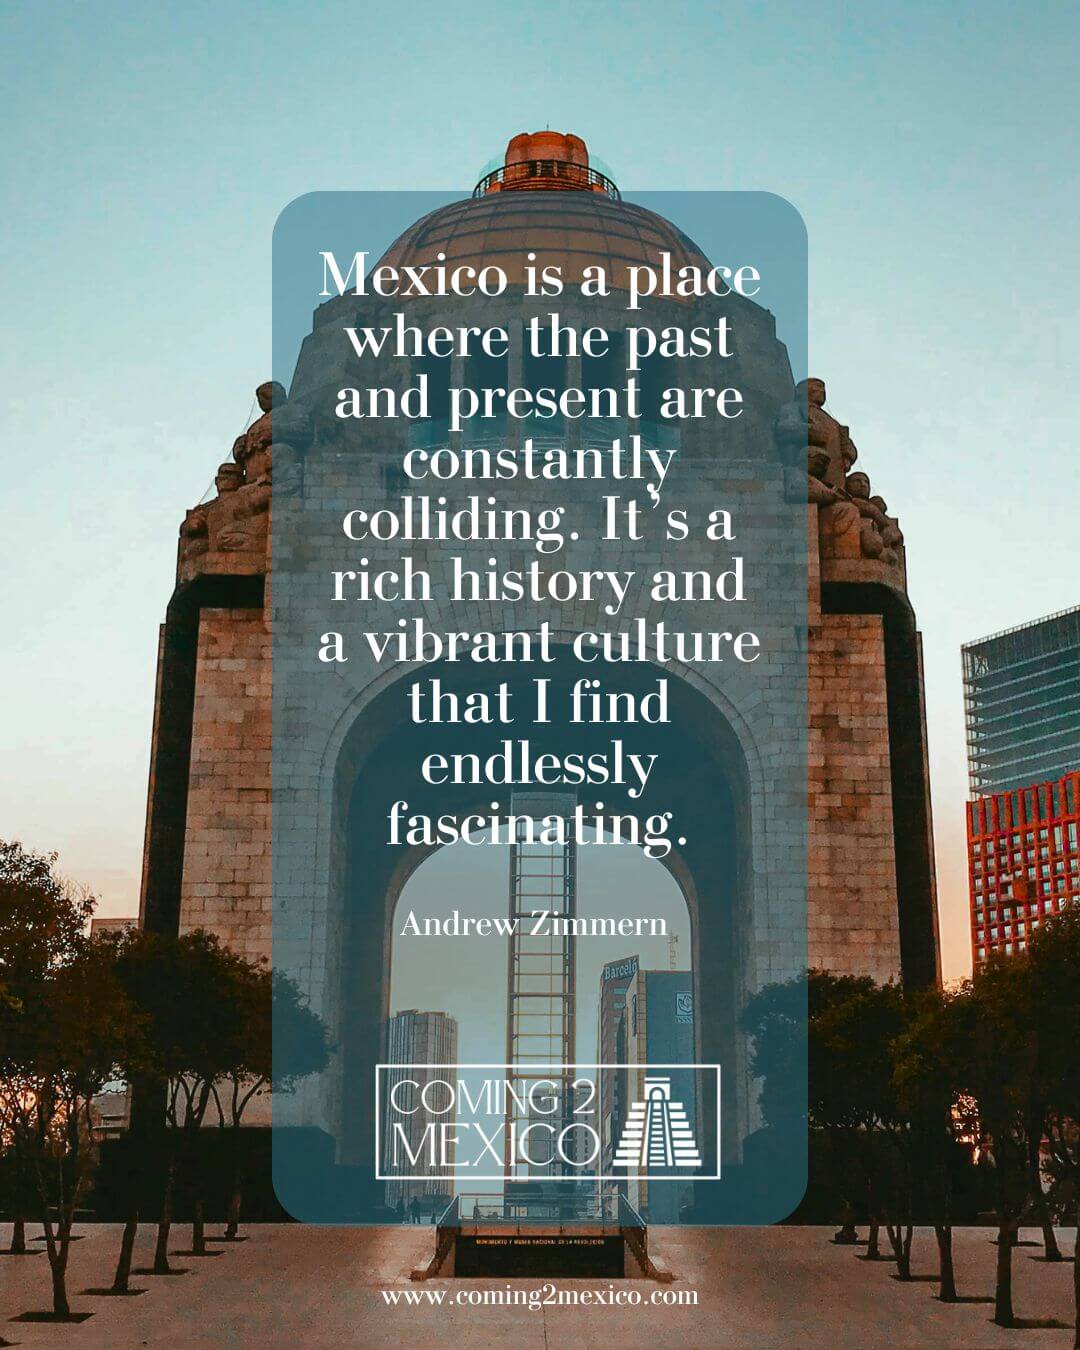 “Mexico is a place where the past and present are constantly colliding. It’s a rich history and a vibrant culture that I find endlessly fascinating.” – Andrew Zimmern